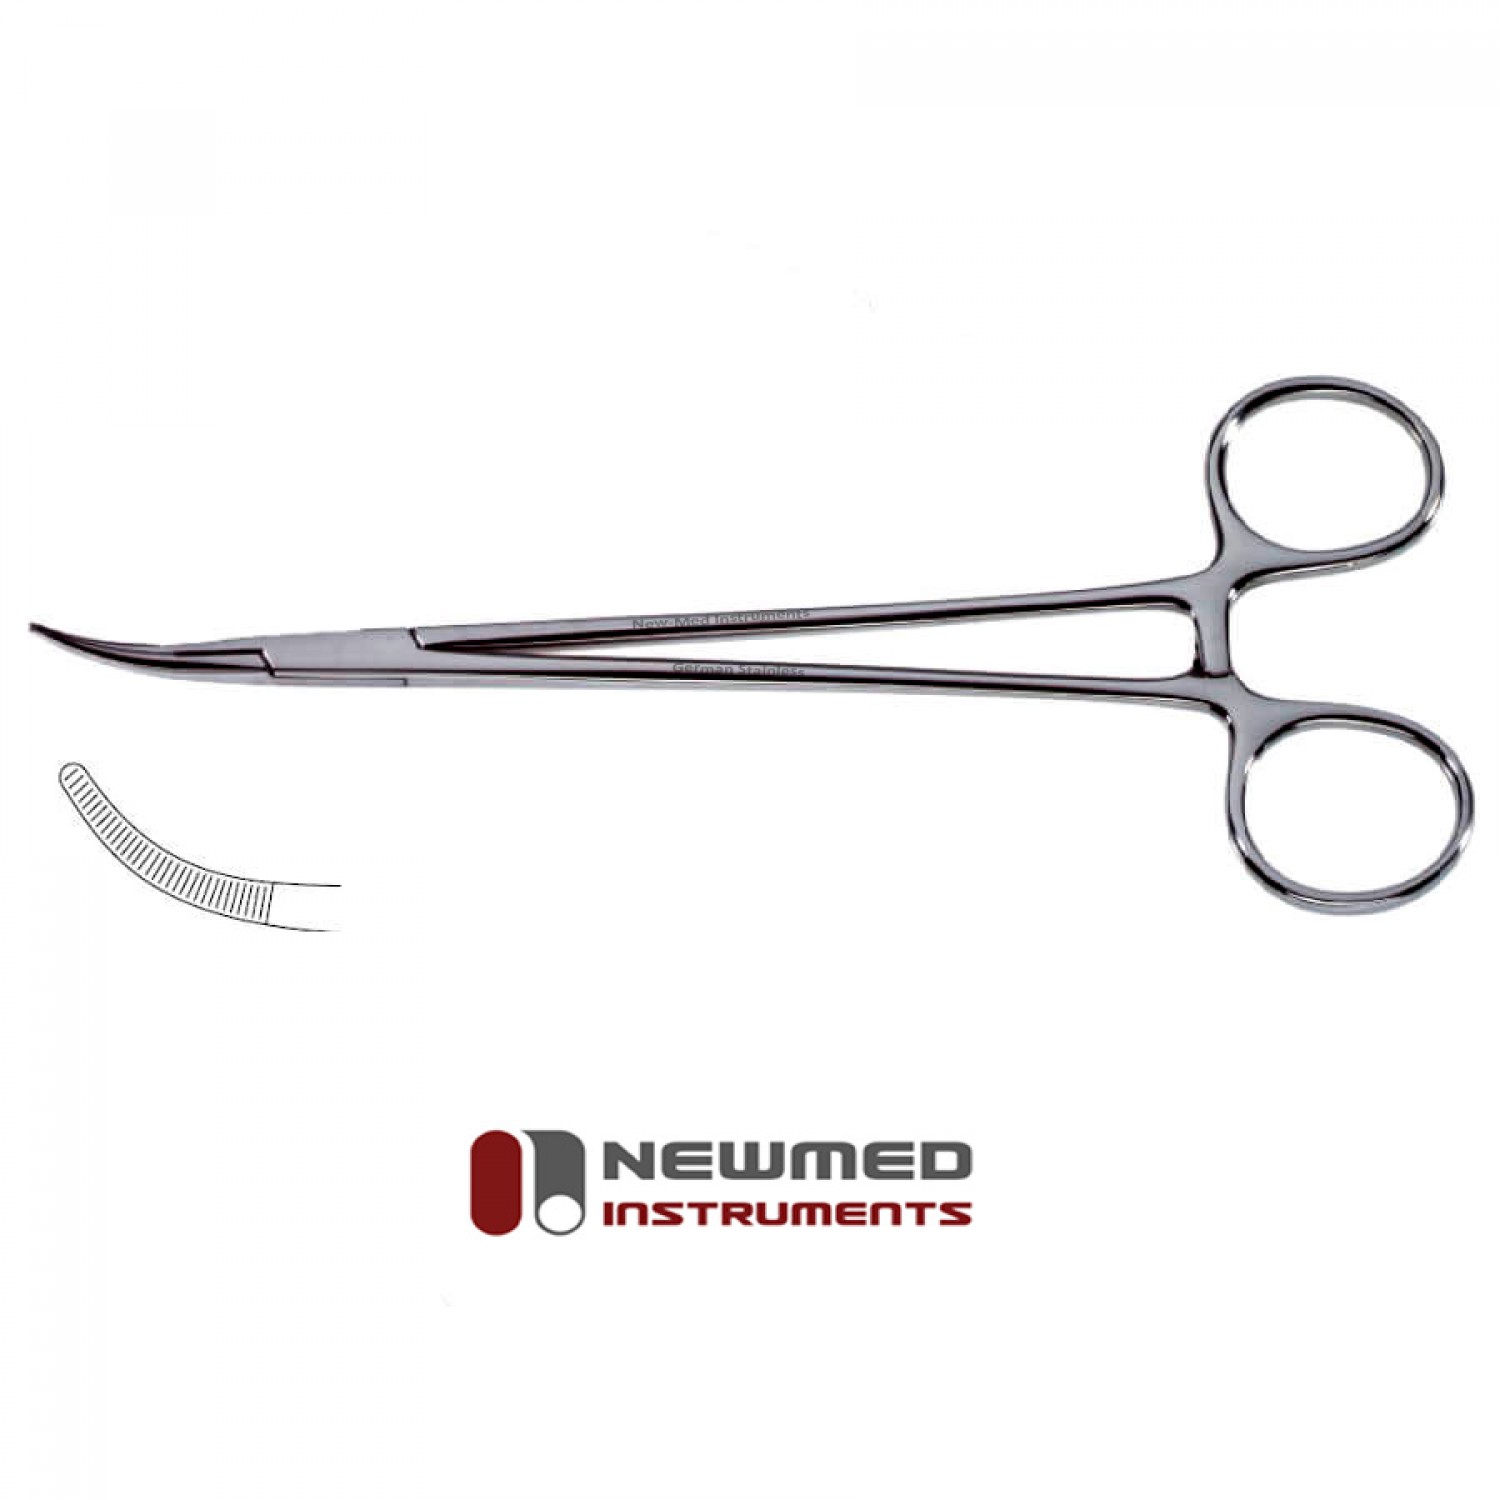 Adson Artery Forceps - Delicate Pattern, Strong Curved